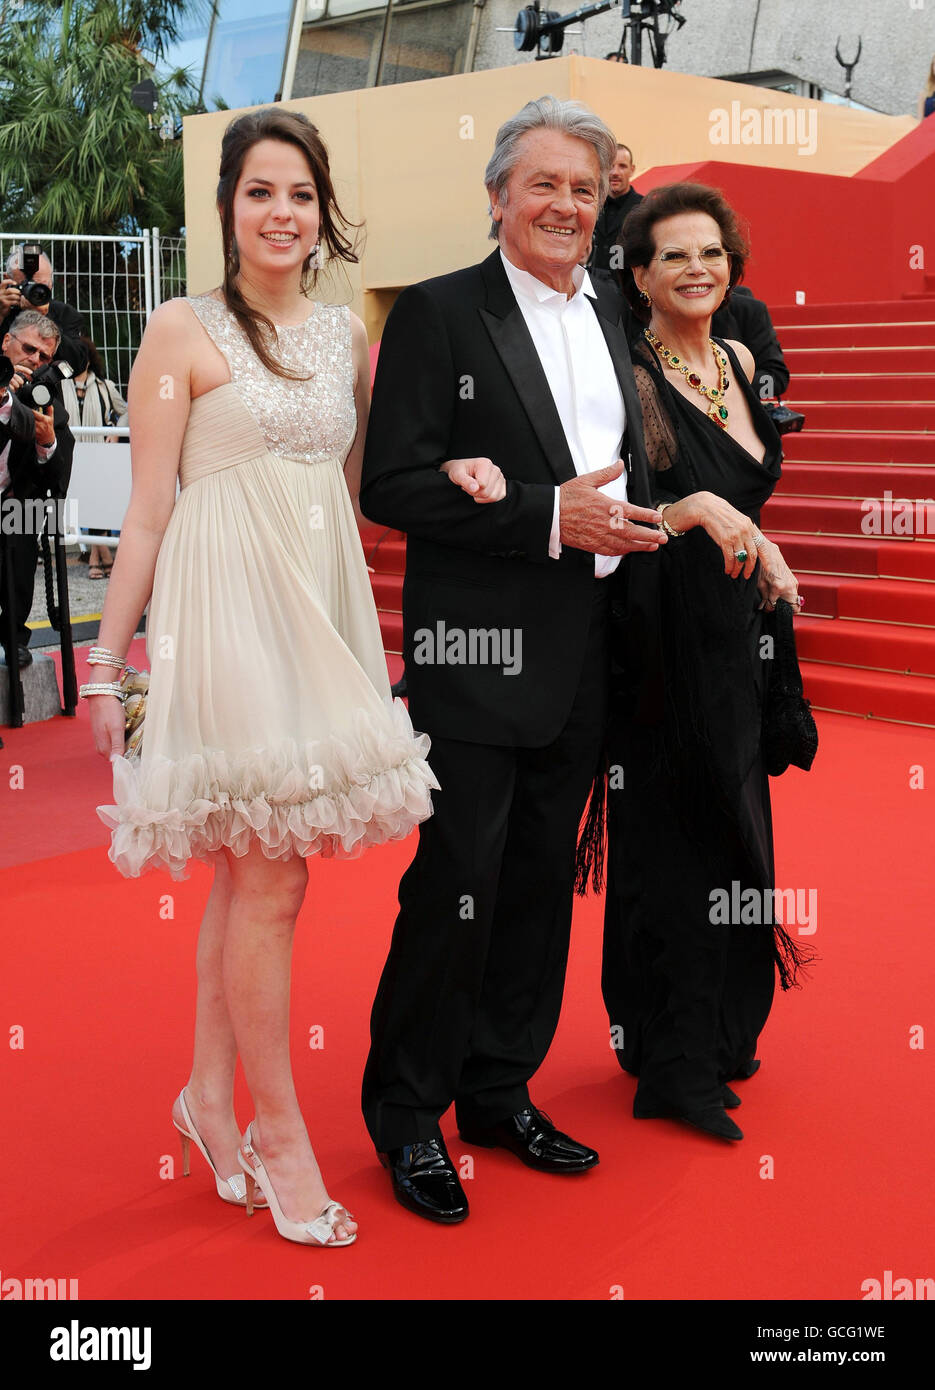 Alain Delon and Claudi Cardinale, right, and Anouska Delon arrive for the screening of Wall Street: Money Never Sleeps at the Grand Auditorium Lumiere during the Cannes Film Festival, France. Stock Photo